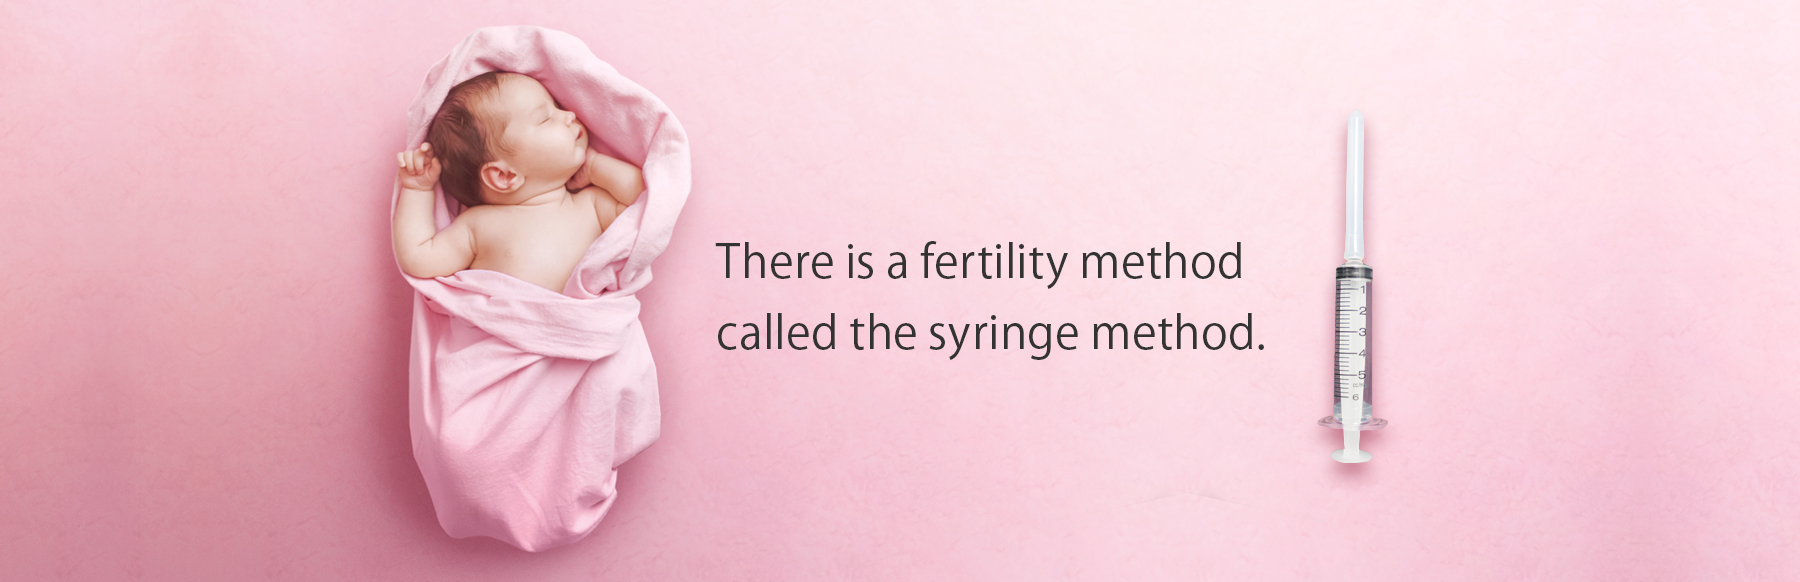 There is a fertility method called the syringe method.